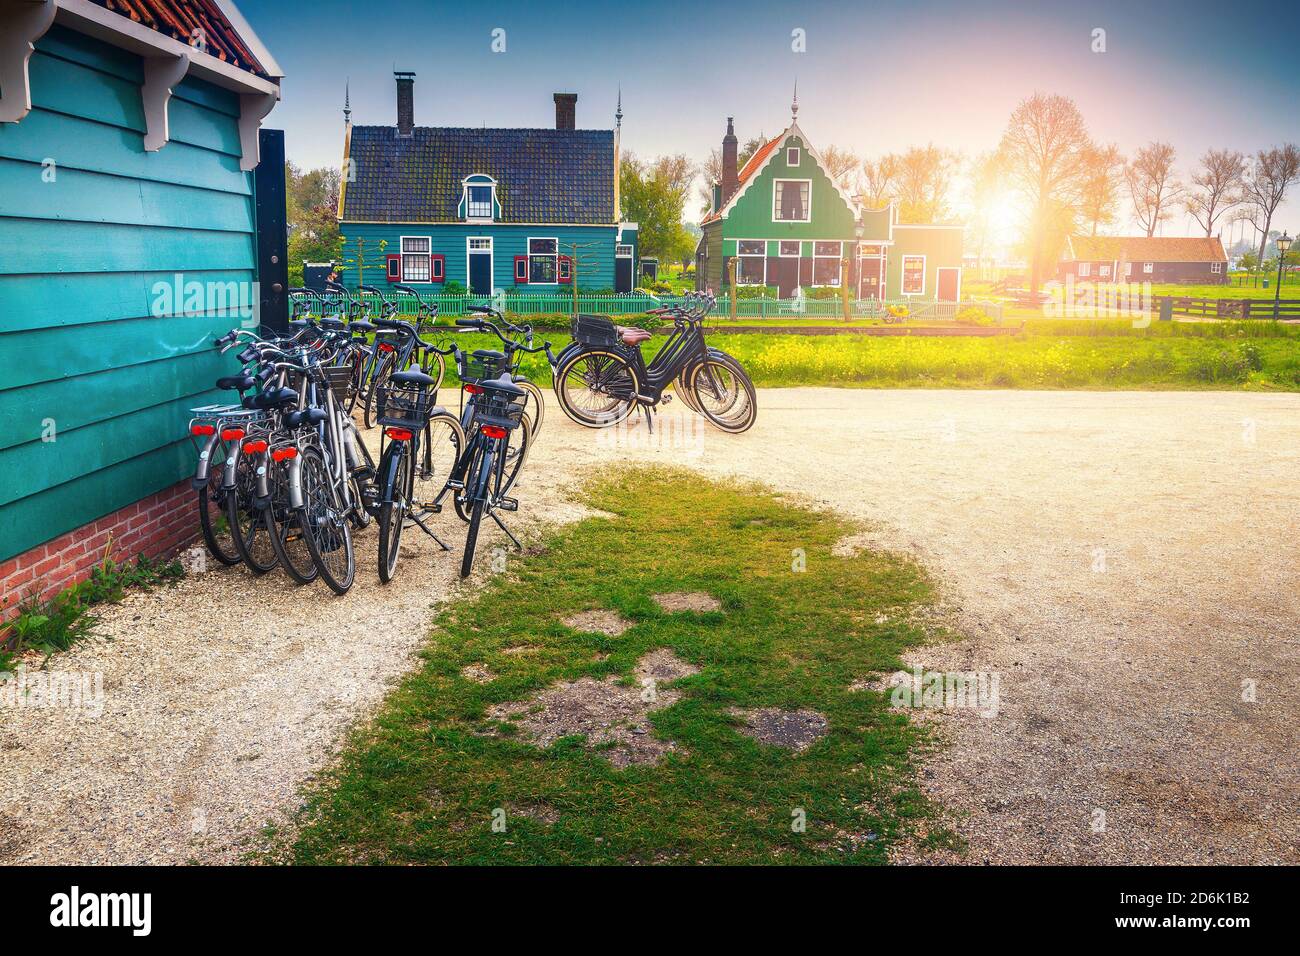 Great touristic location with traditional wooden houses at dawn. Bicycles parked near wooden house at sunrise, Zaanse Schans, Netherlands, Europe Stock Photo